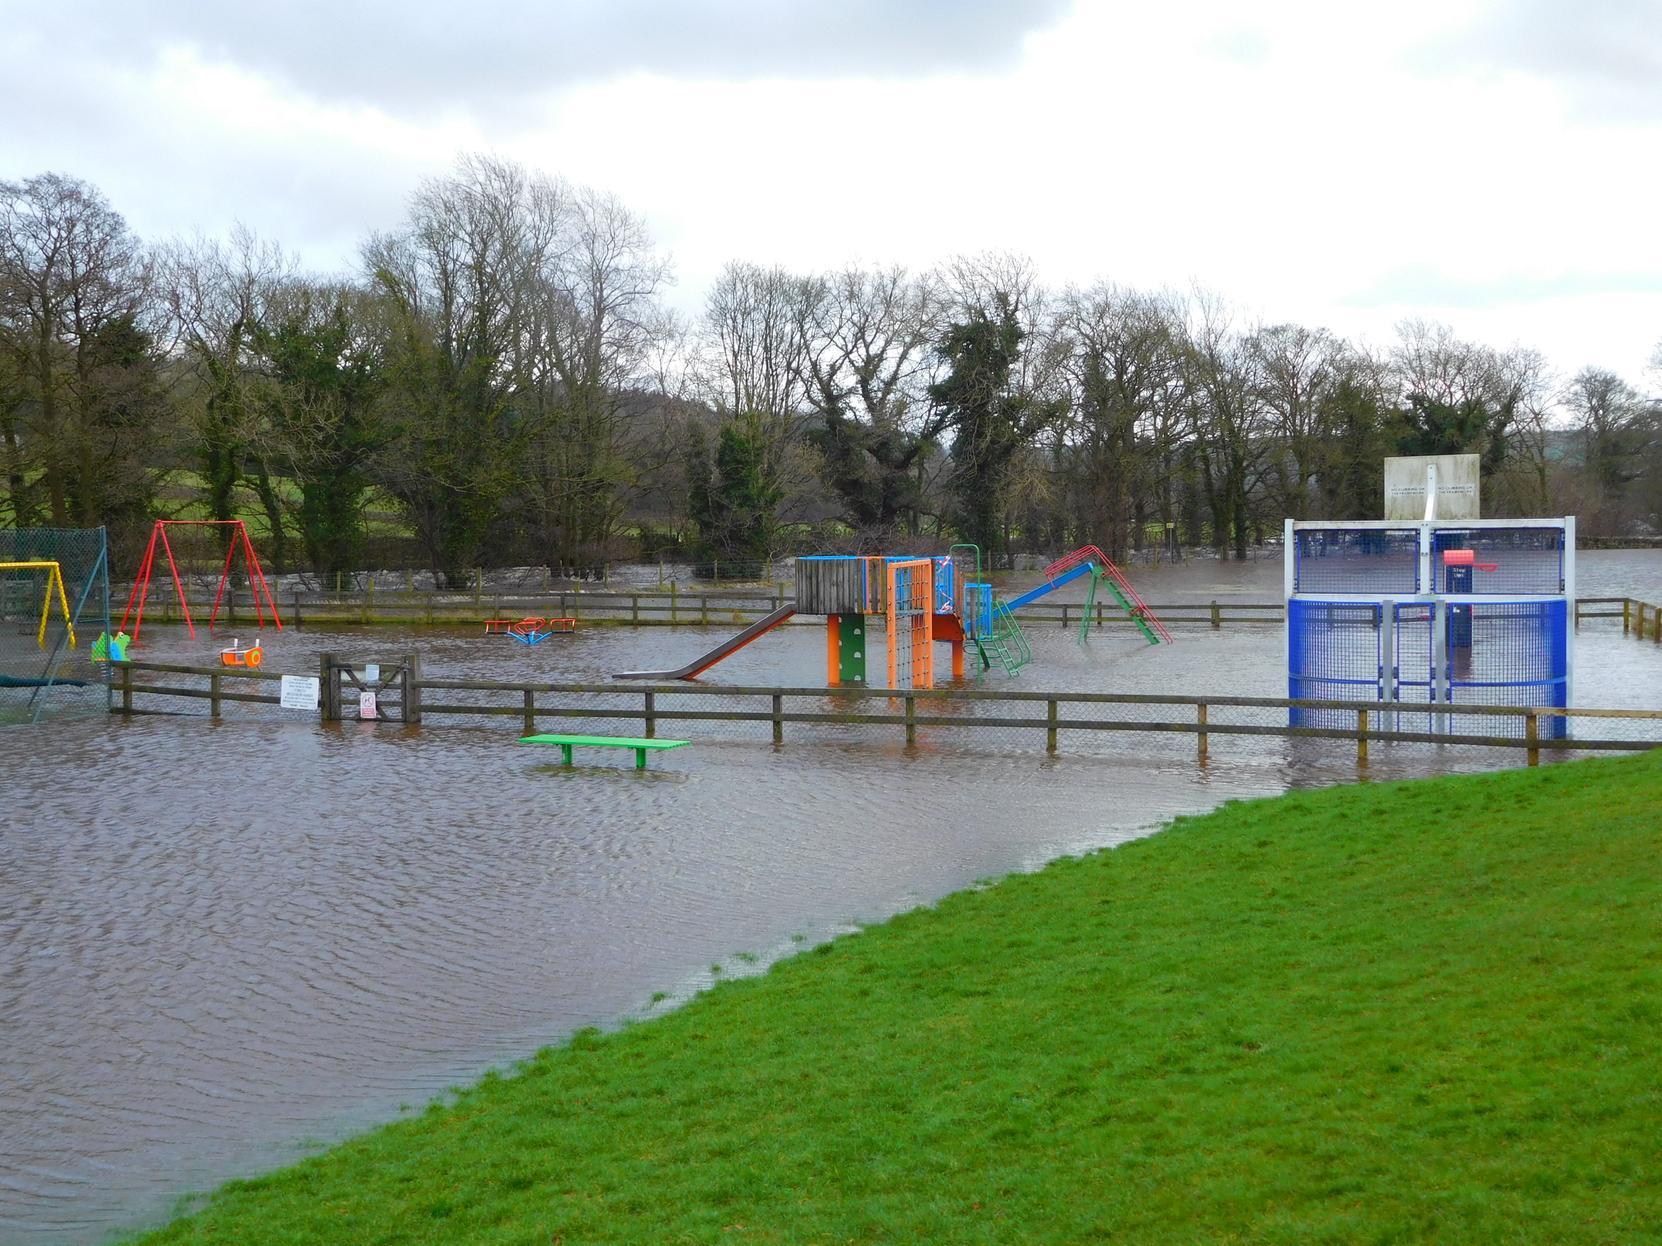 Visitors to Dacre Banks playground were met with this sight yesterday.